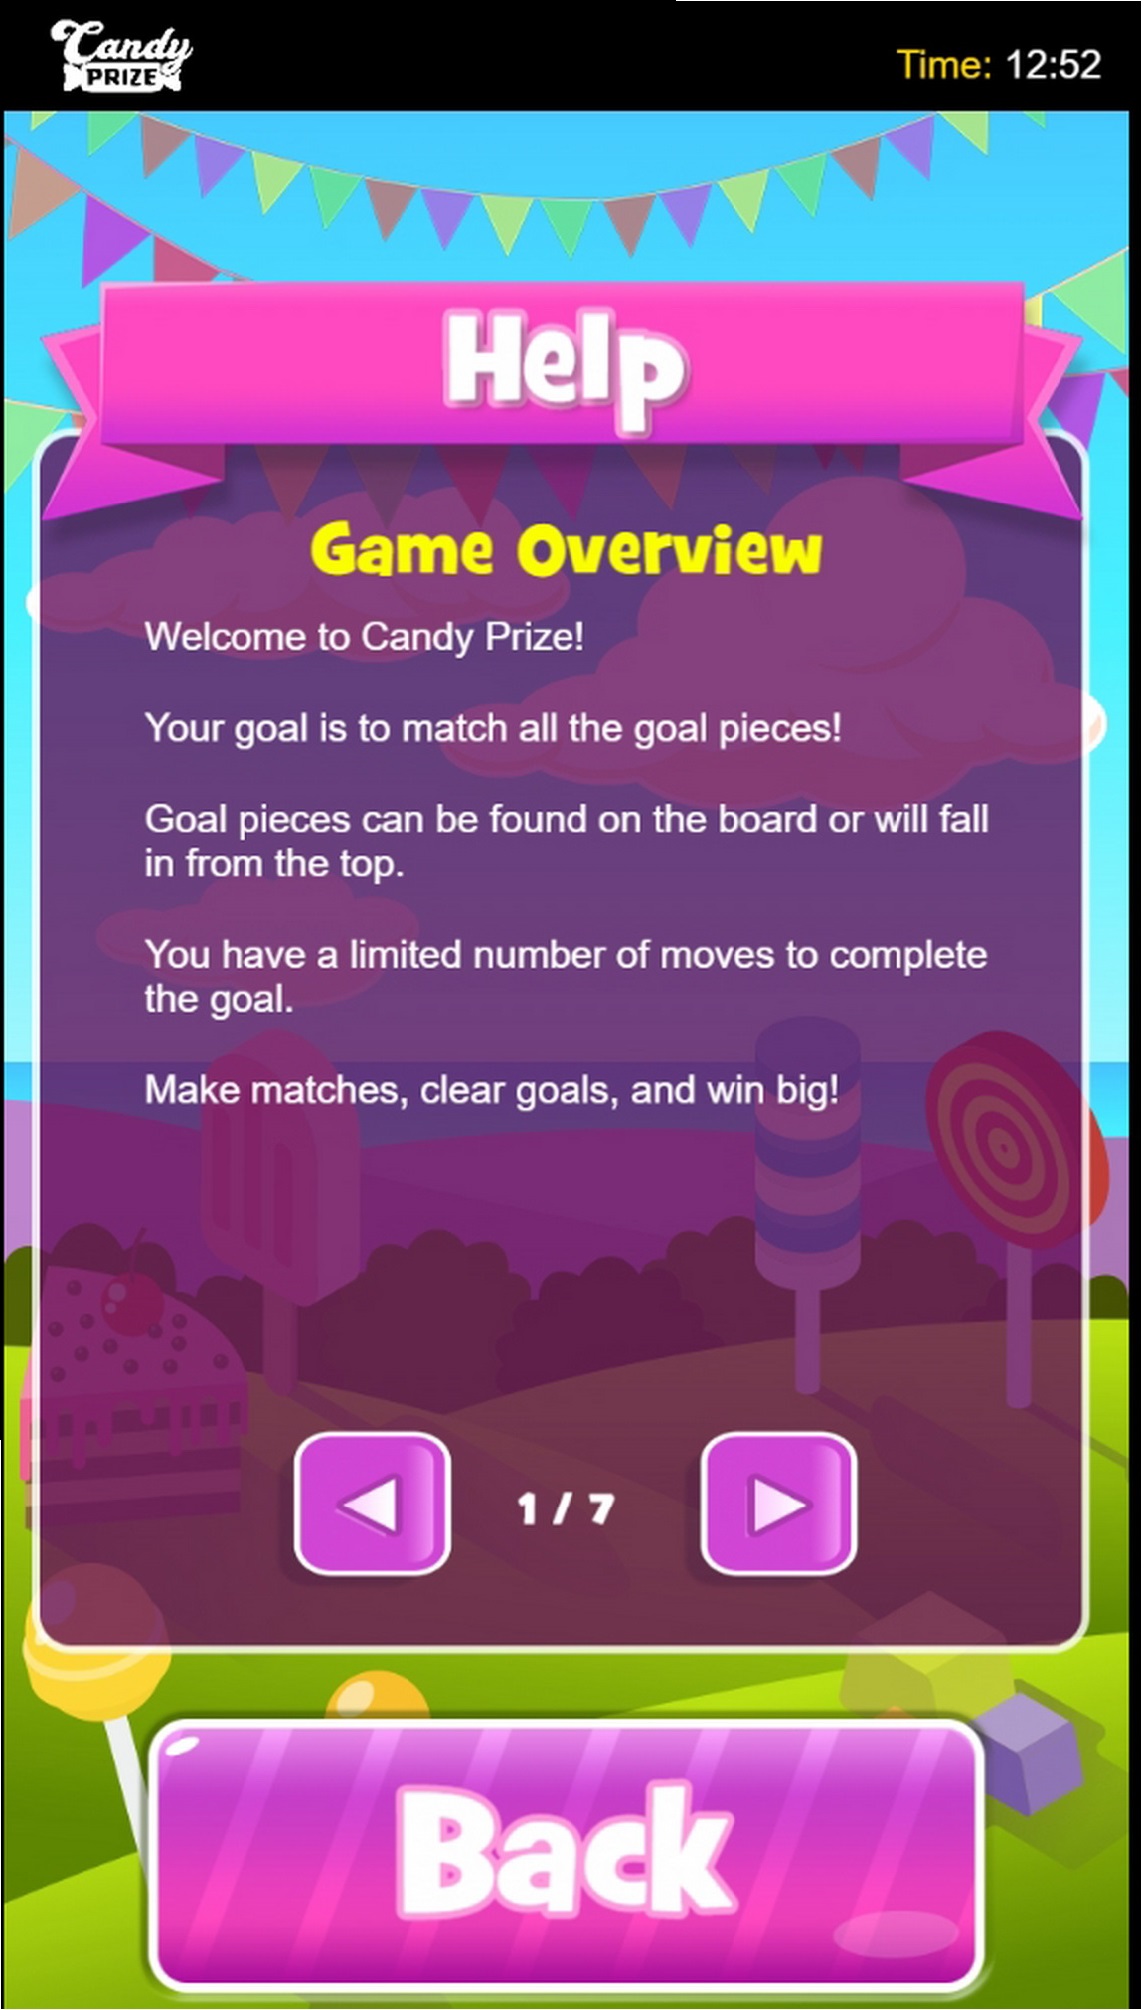 Info of Candy Prize Slot Game by Green Jade Games